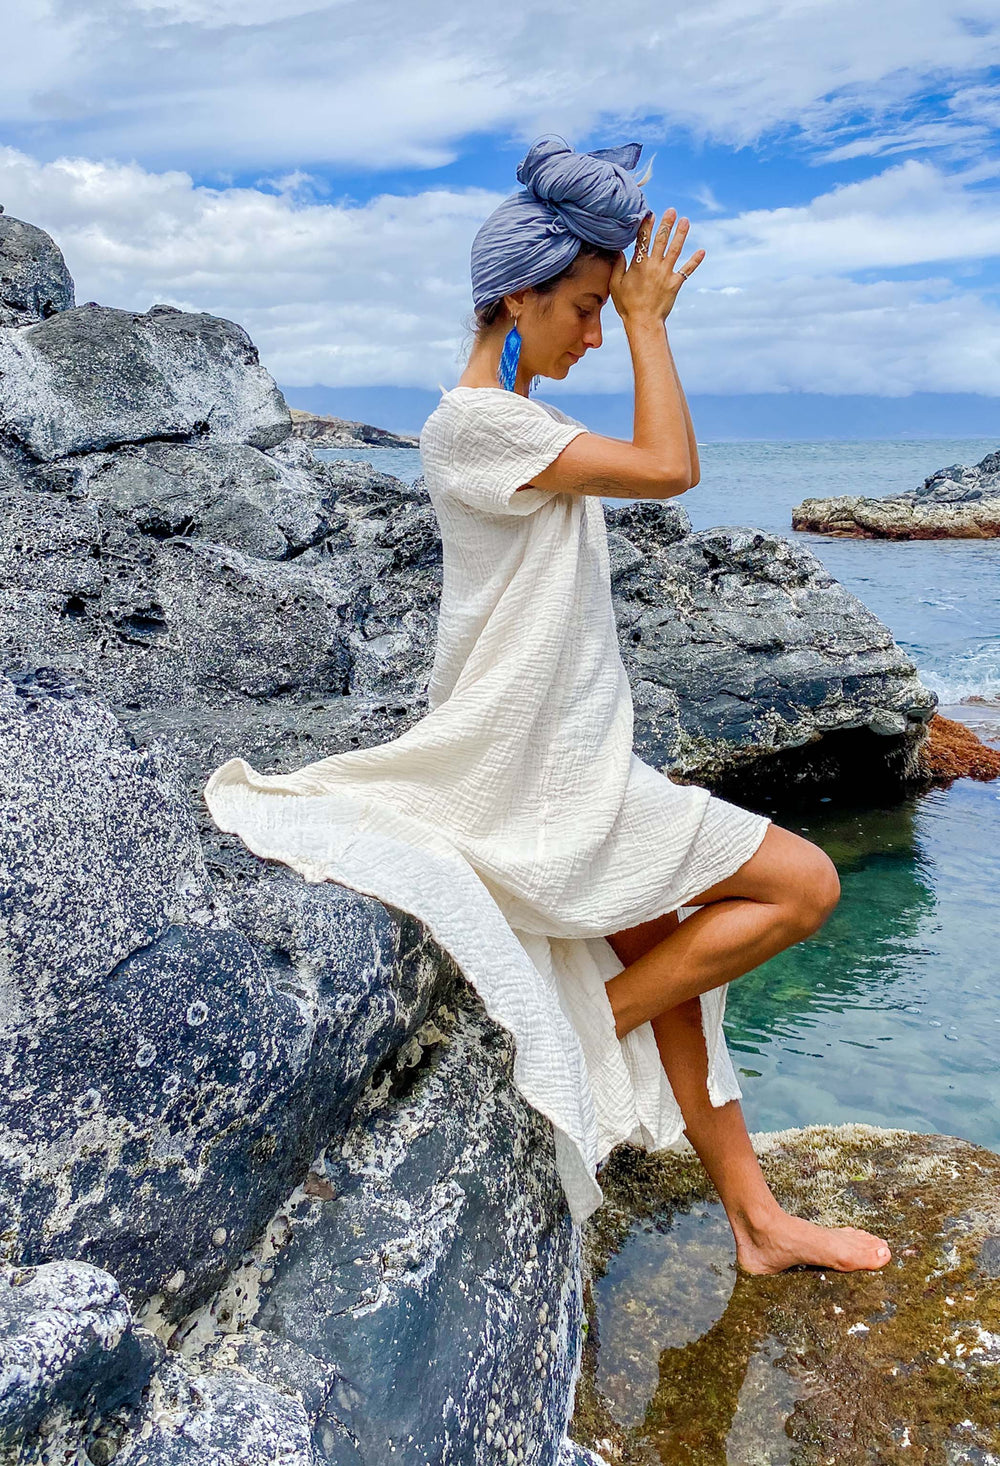 Female model sits a water's edge on a rock wearing blue head scarf and long un-dyed dress.